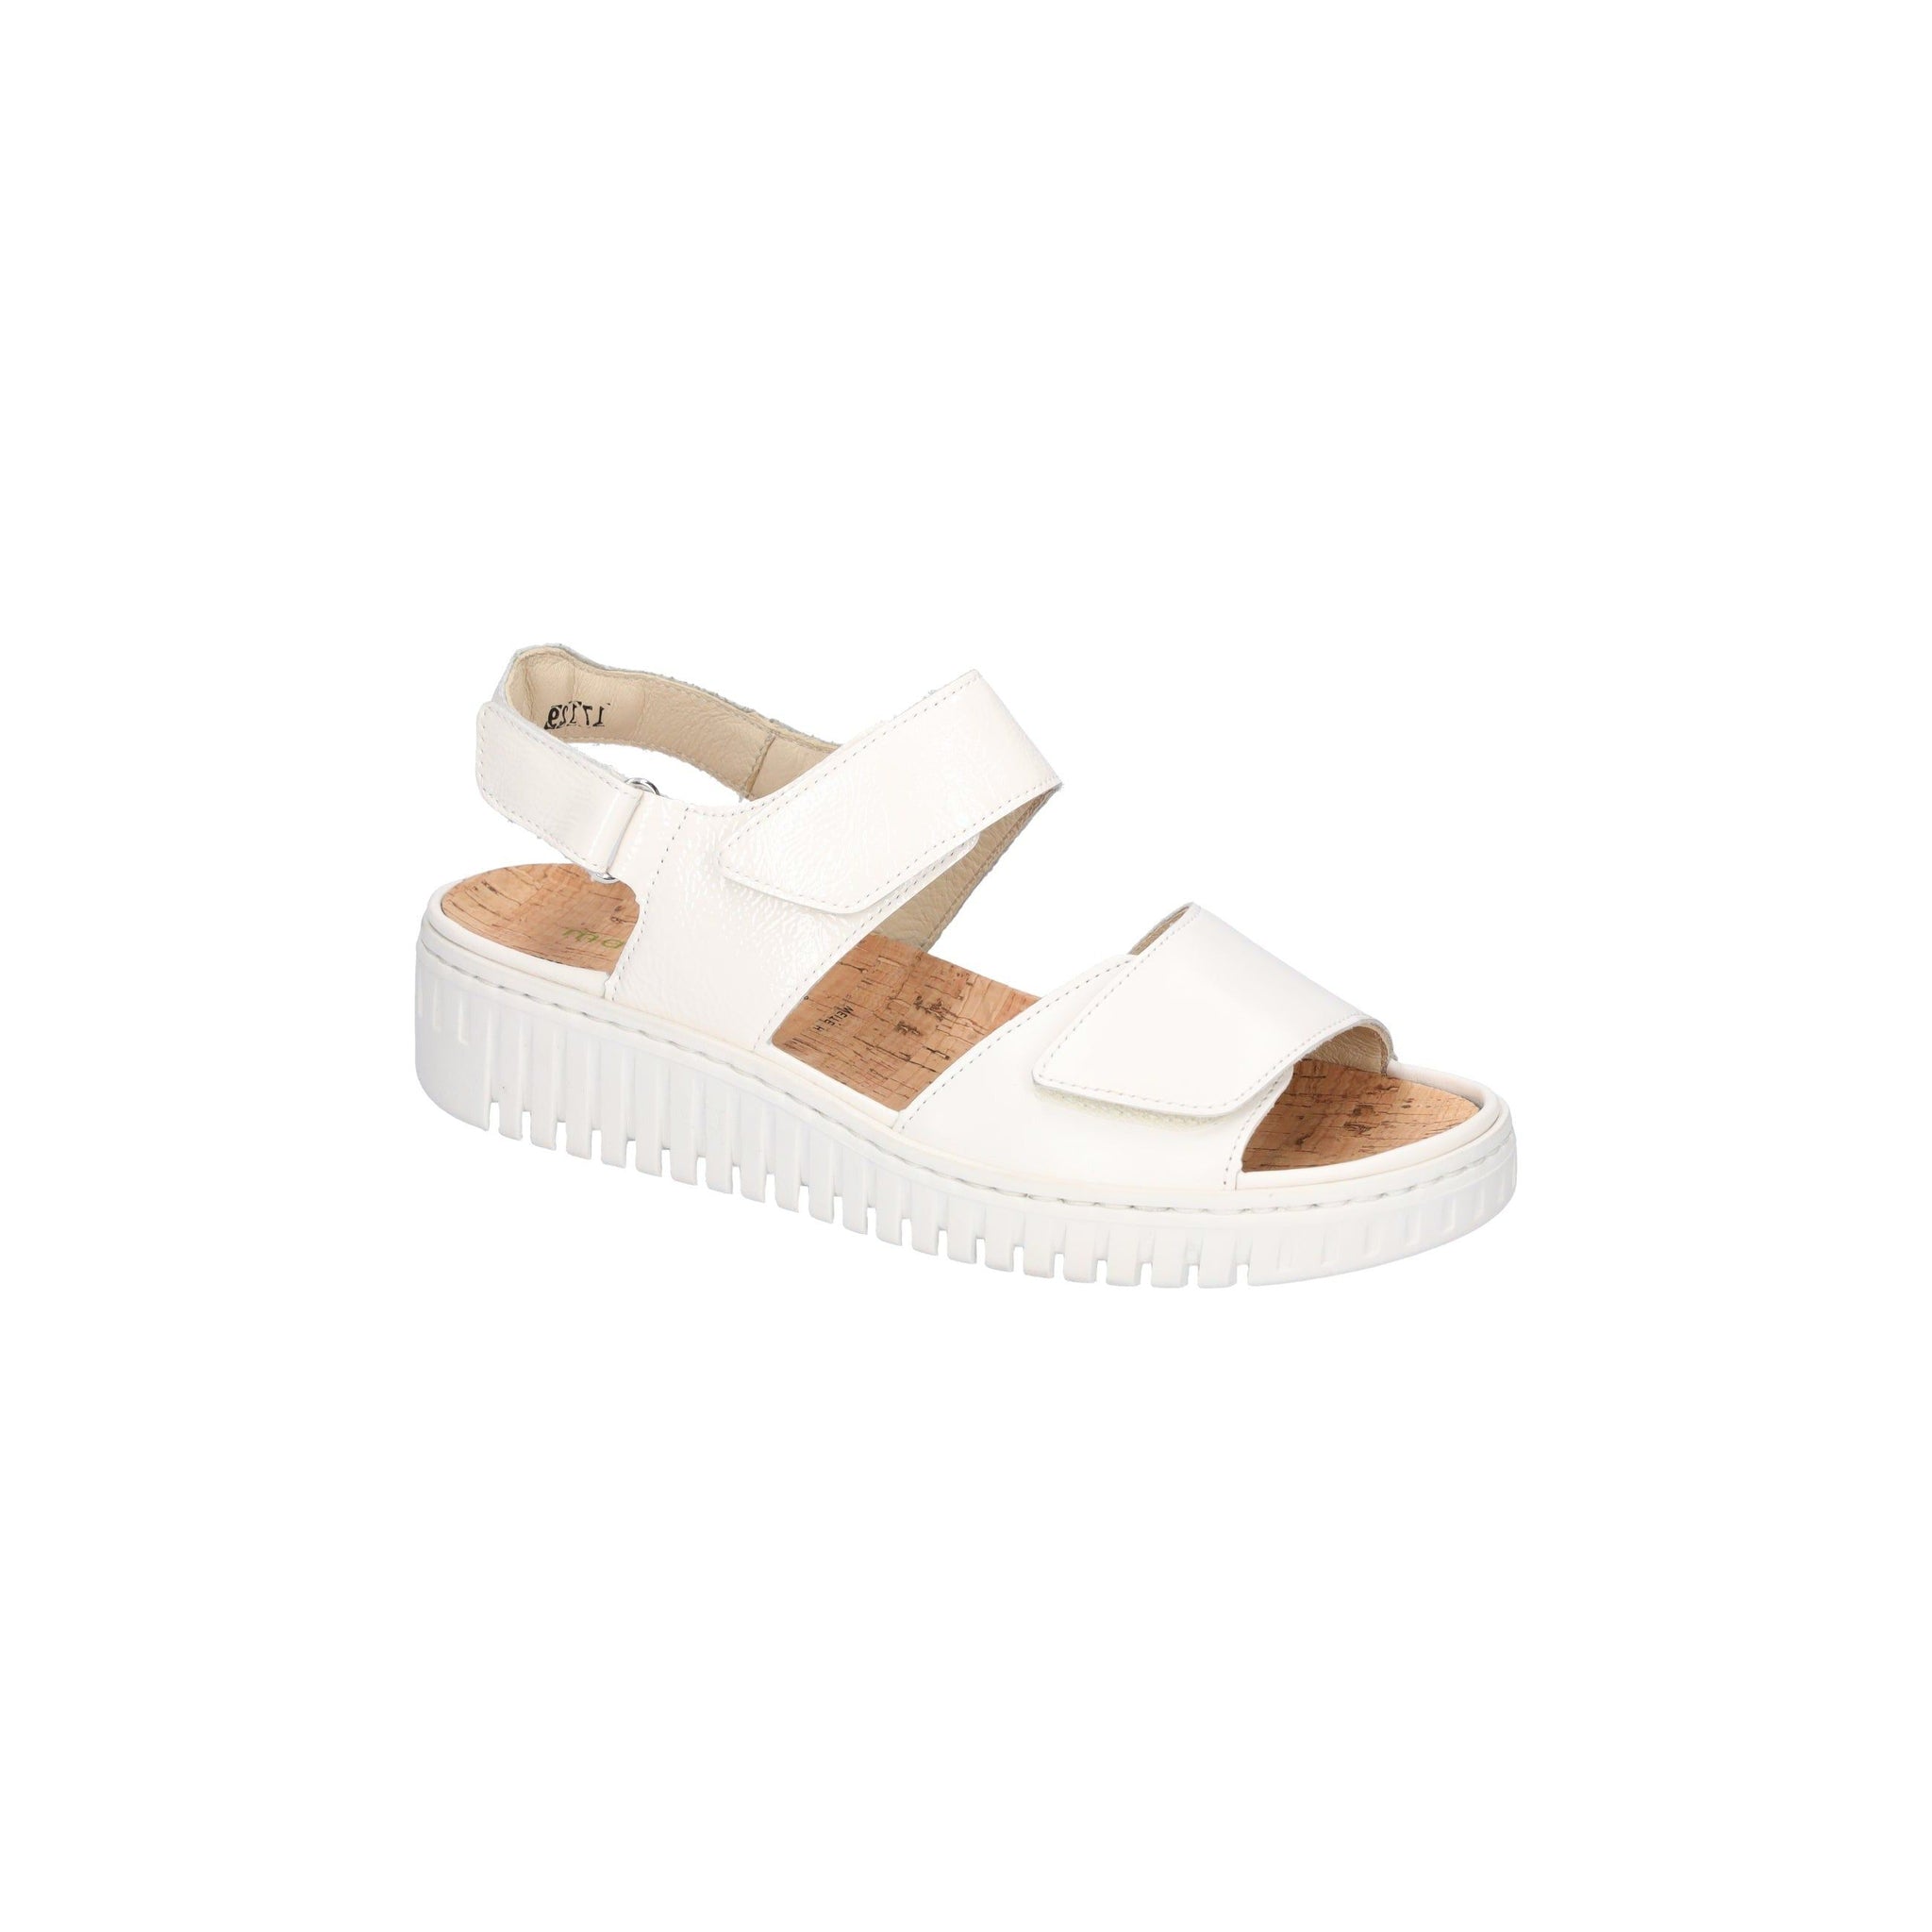 Waldlaufer Willow (955001) - Ladies Sandal in White Patent . Waldlaufer Shoes | Wide Fit Shoes | Wisemans | Bantry | Co. Cork | Munster | Shoe Shop| Ireland